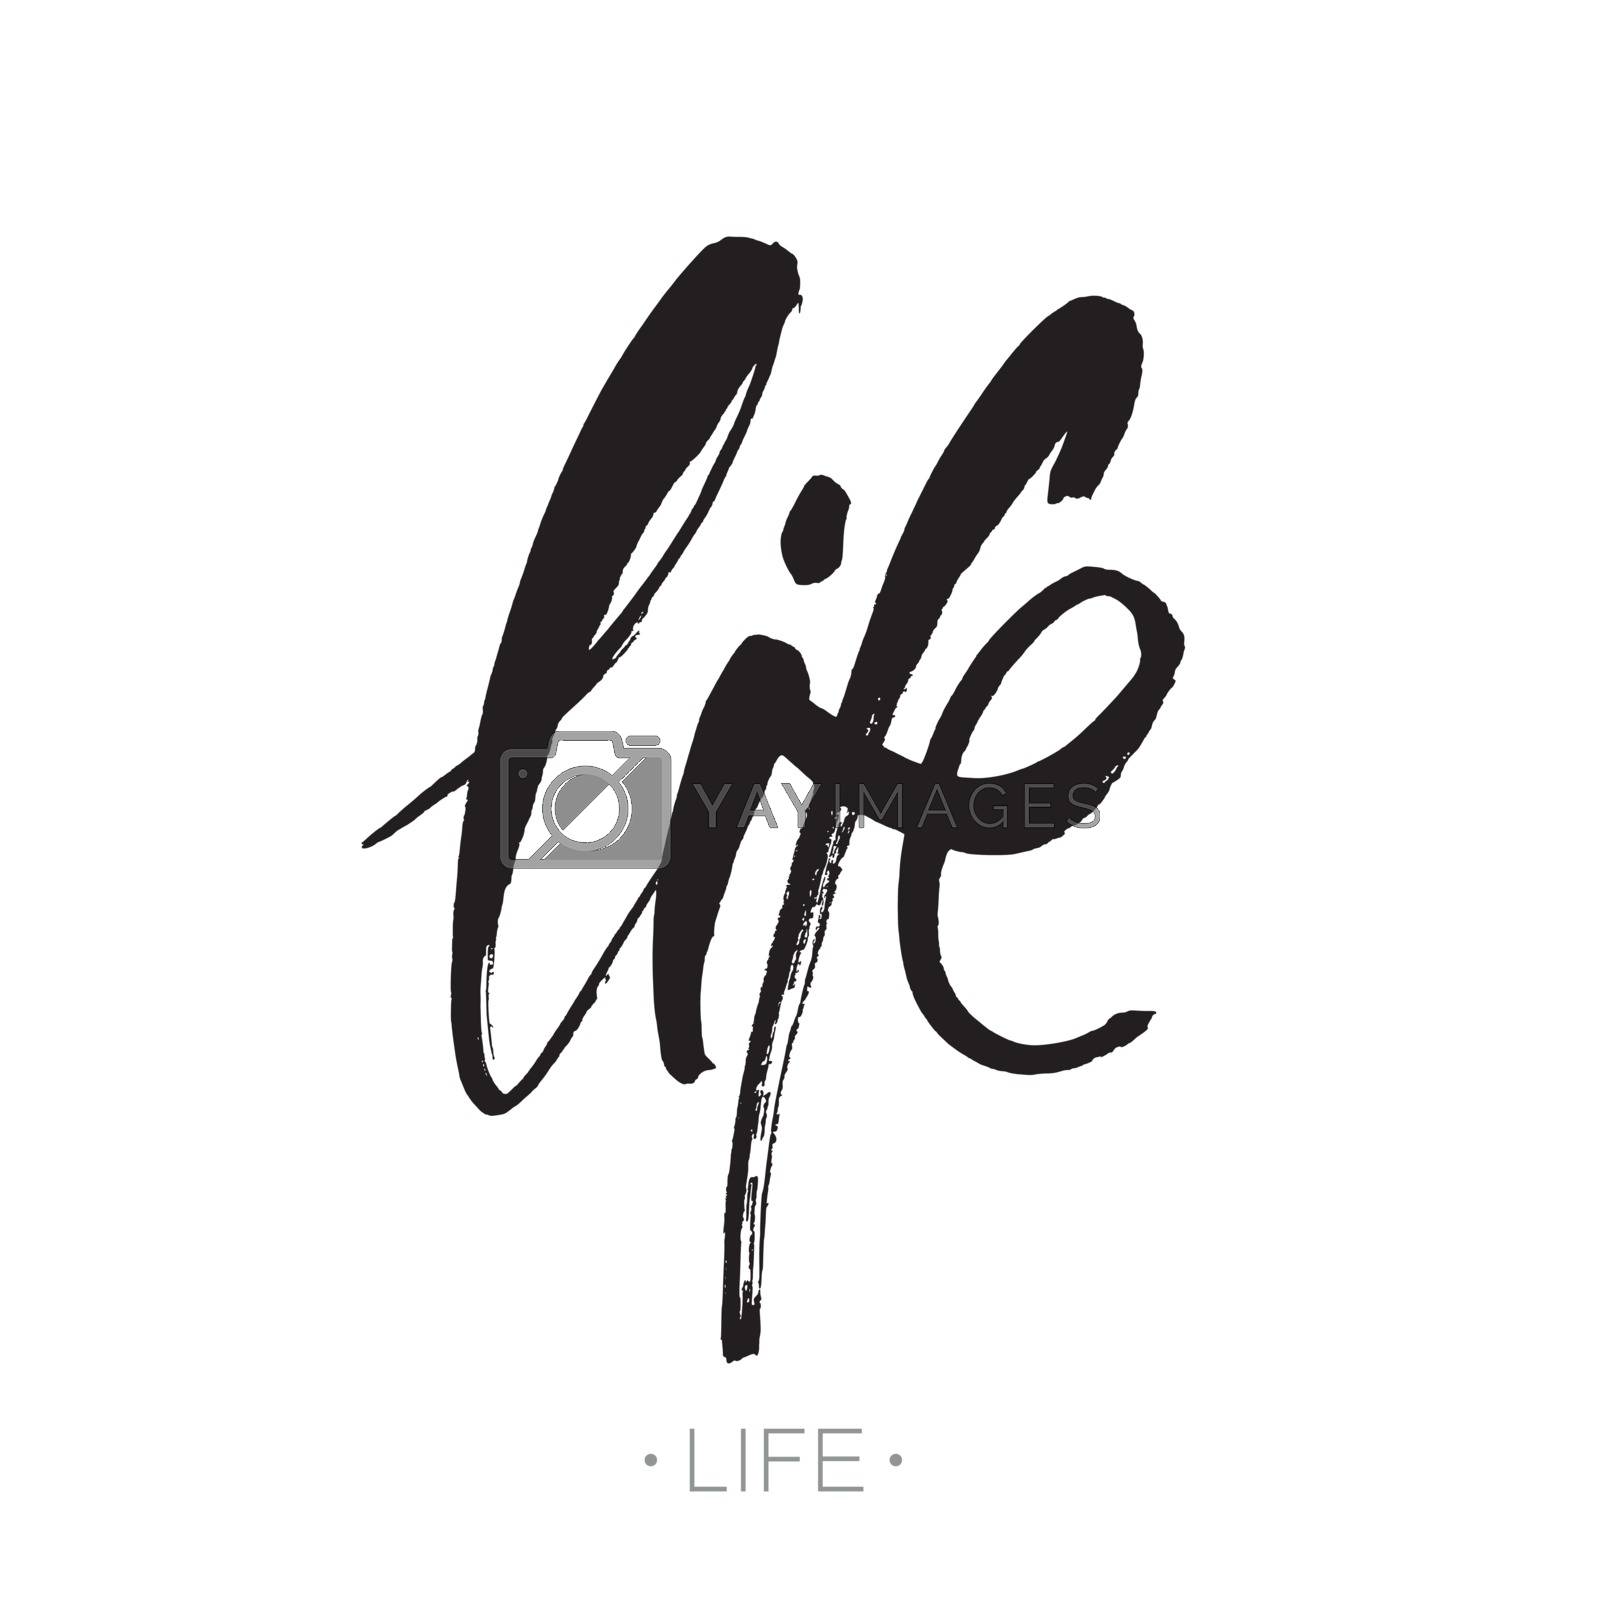 Royalty free image of life_lettering_template by antoshkaforever